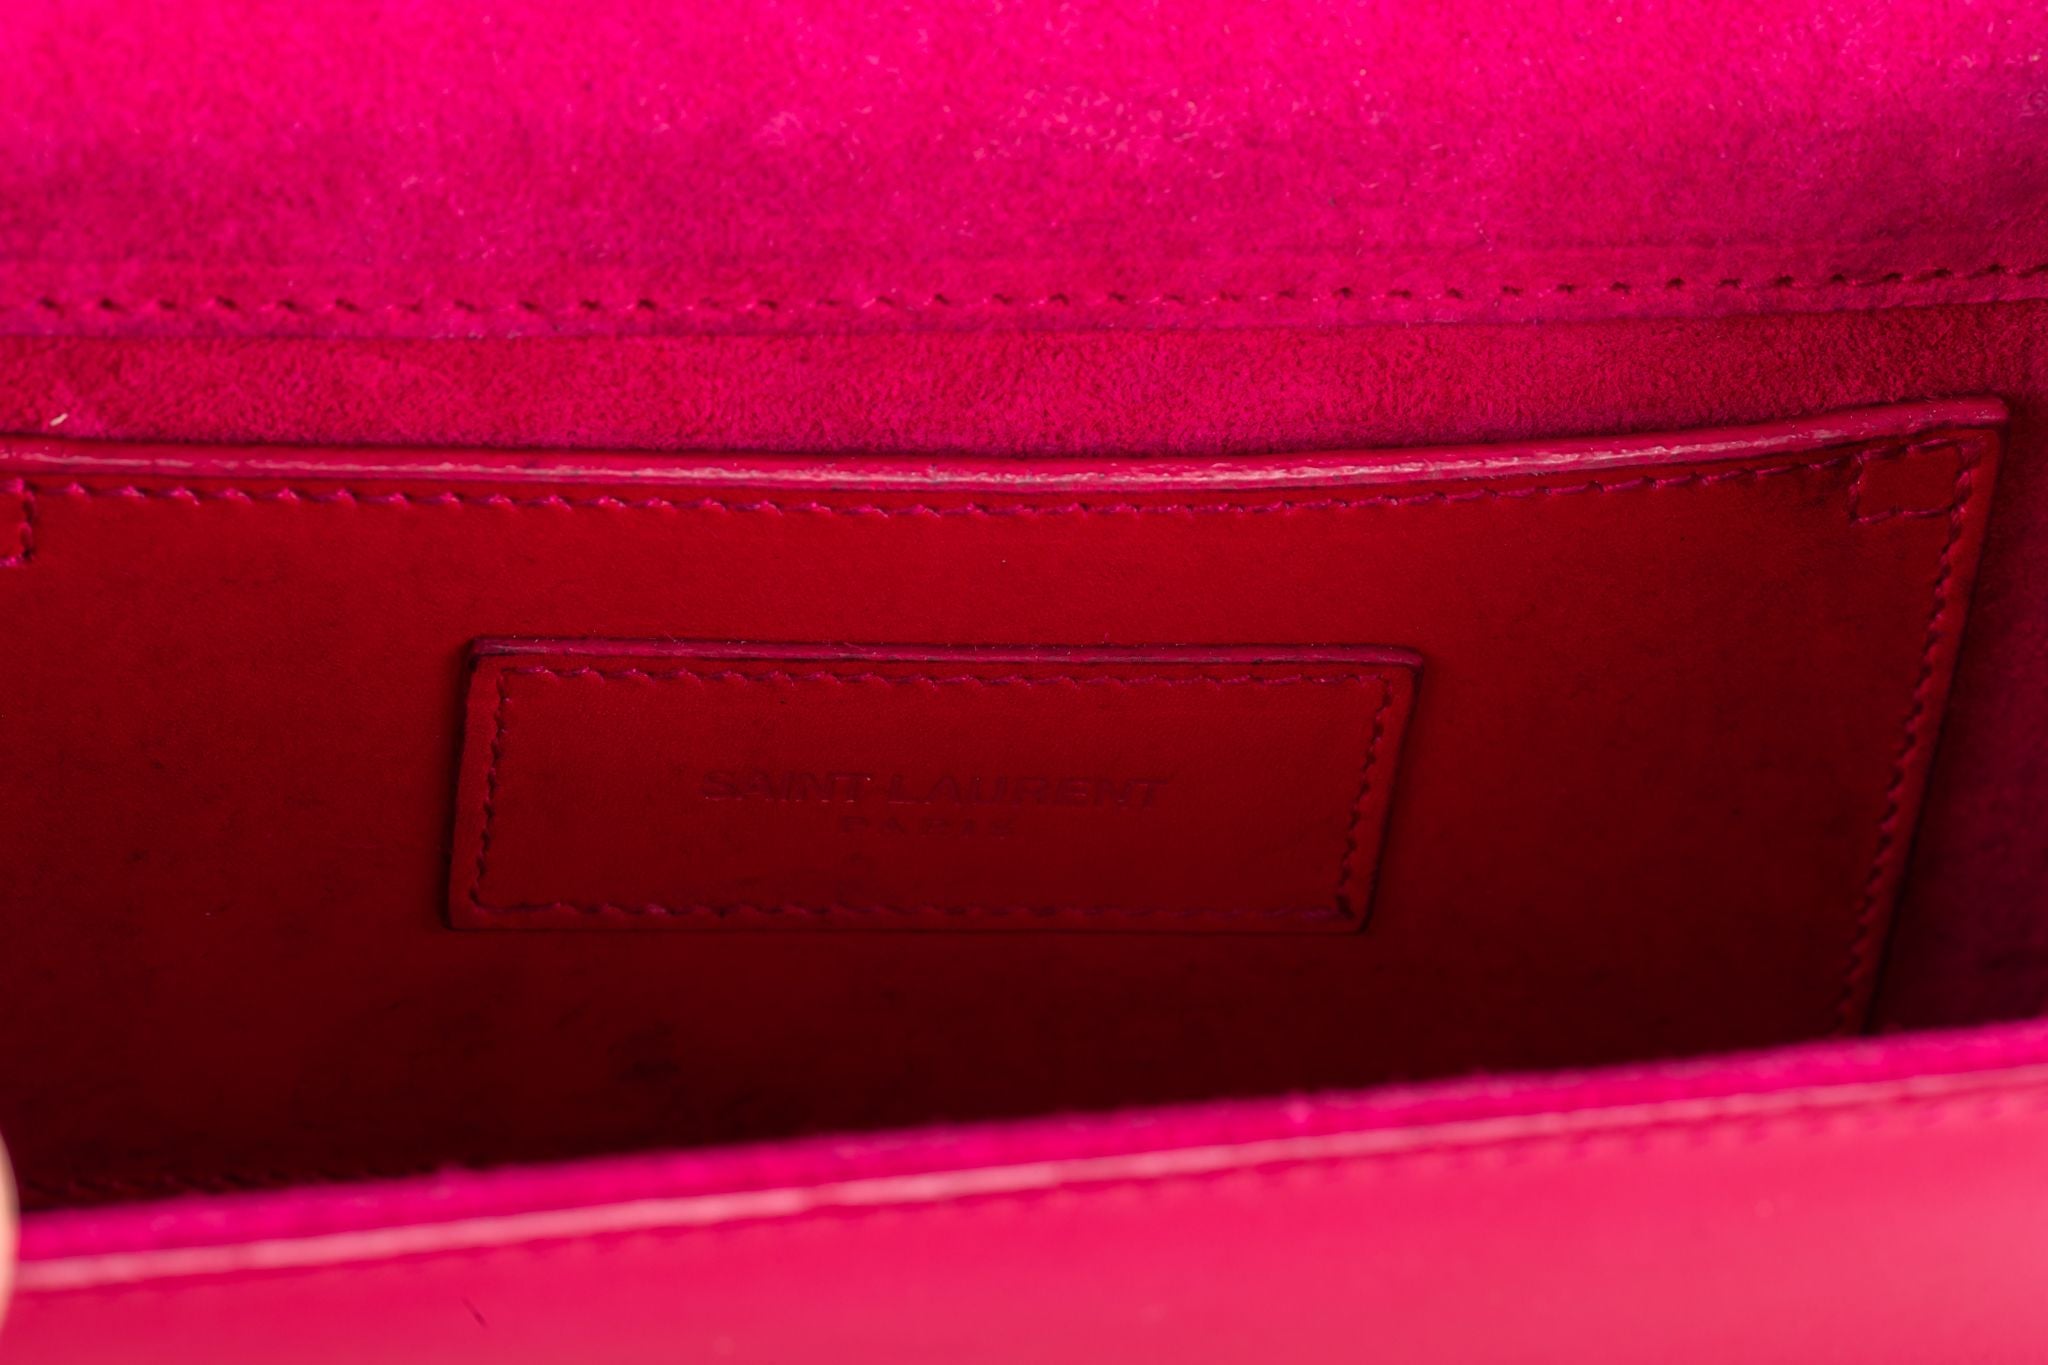 Small Leather Bag in Fuchsia Pink. Cross Body Bag Shoulder 